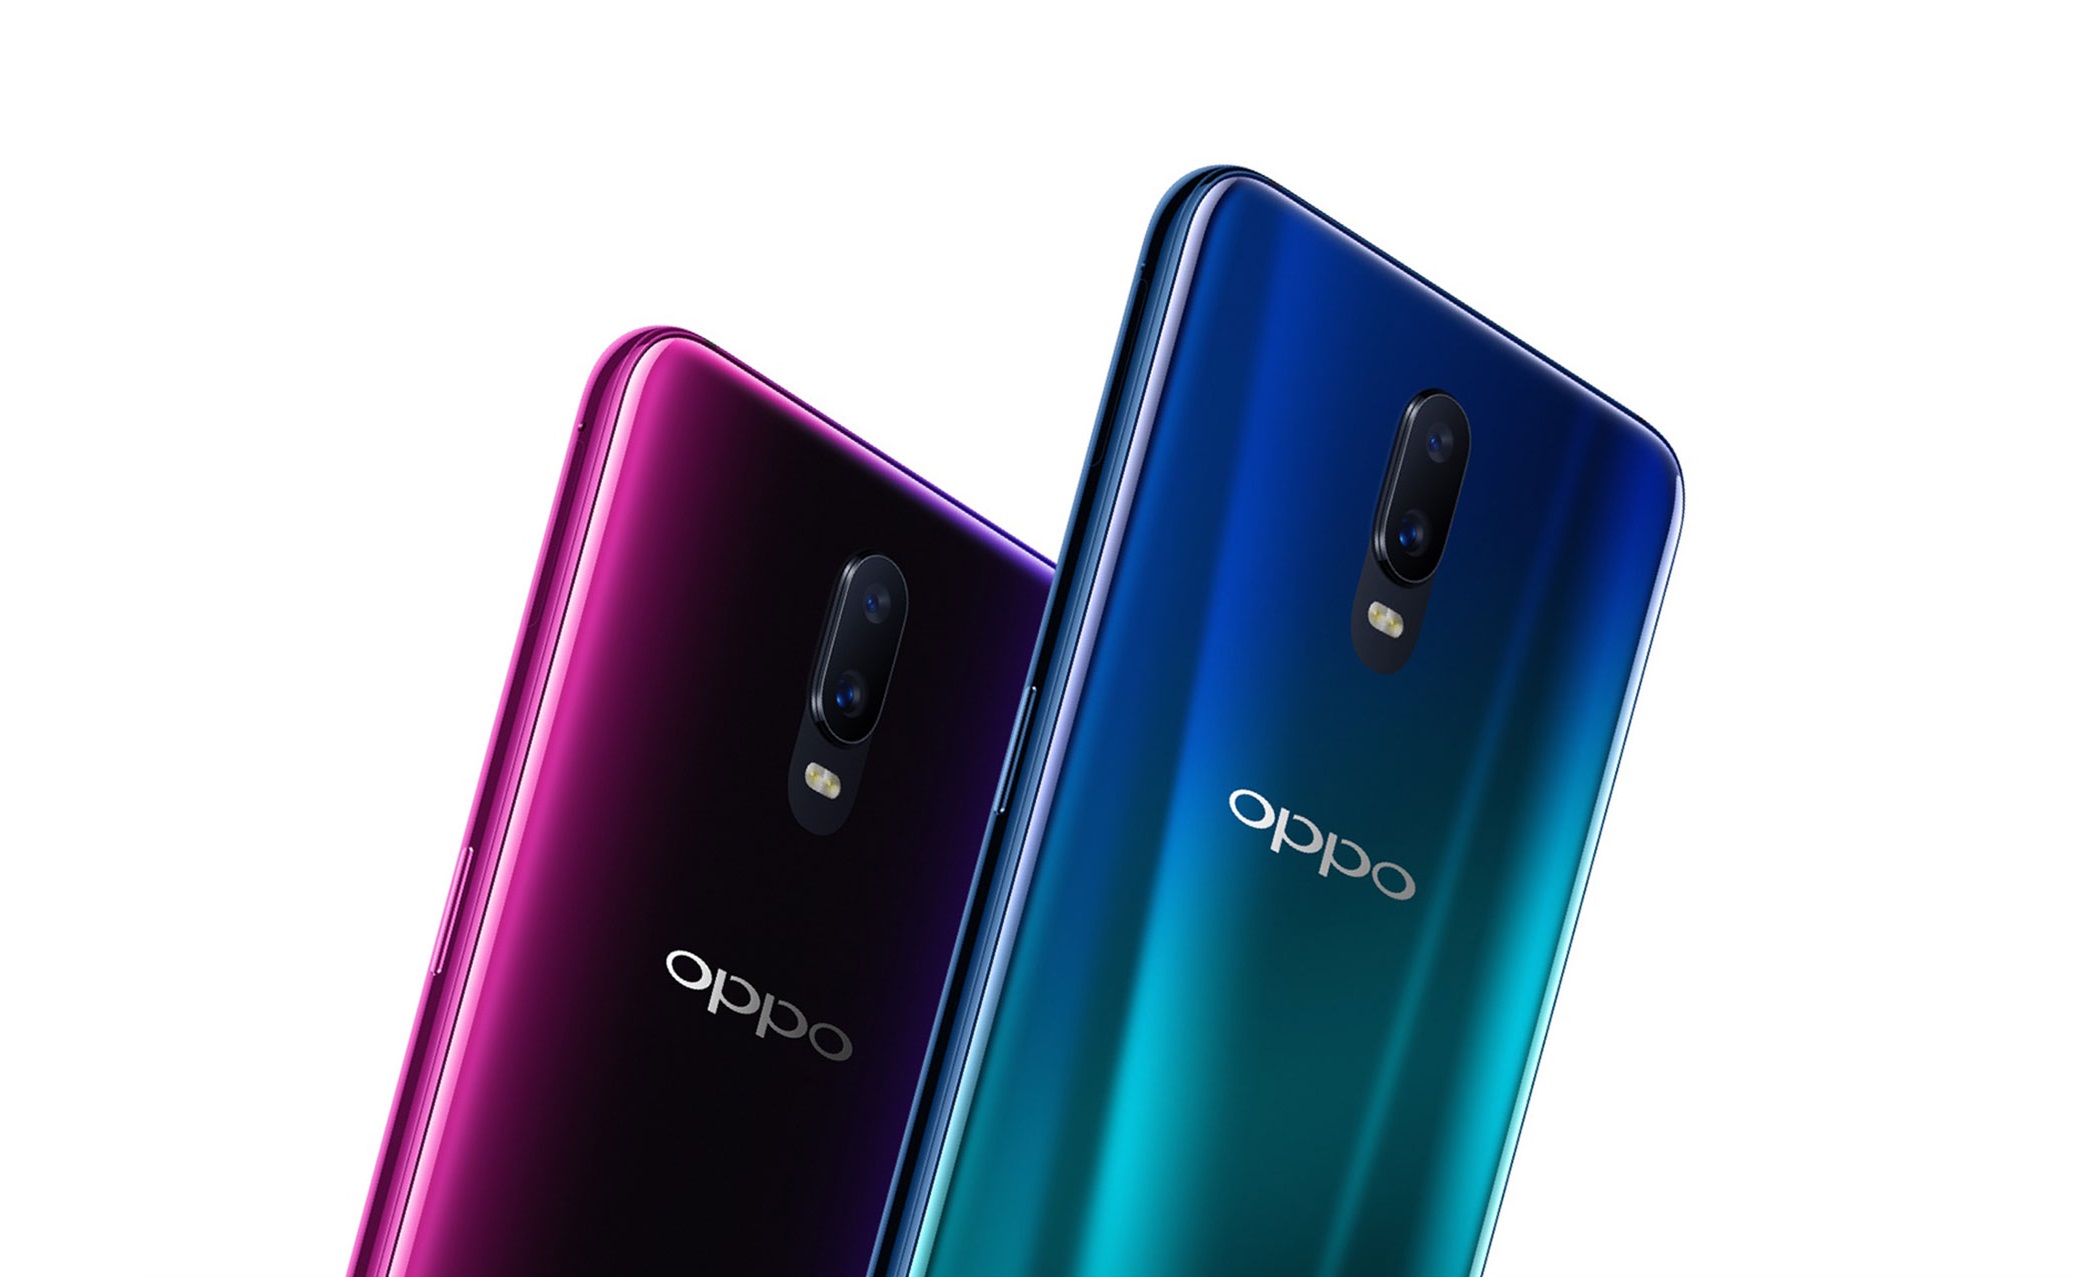 OPPO R17 flagship phone in pink and blue.